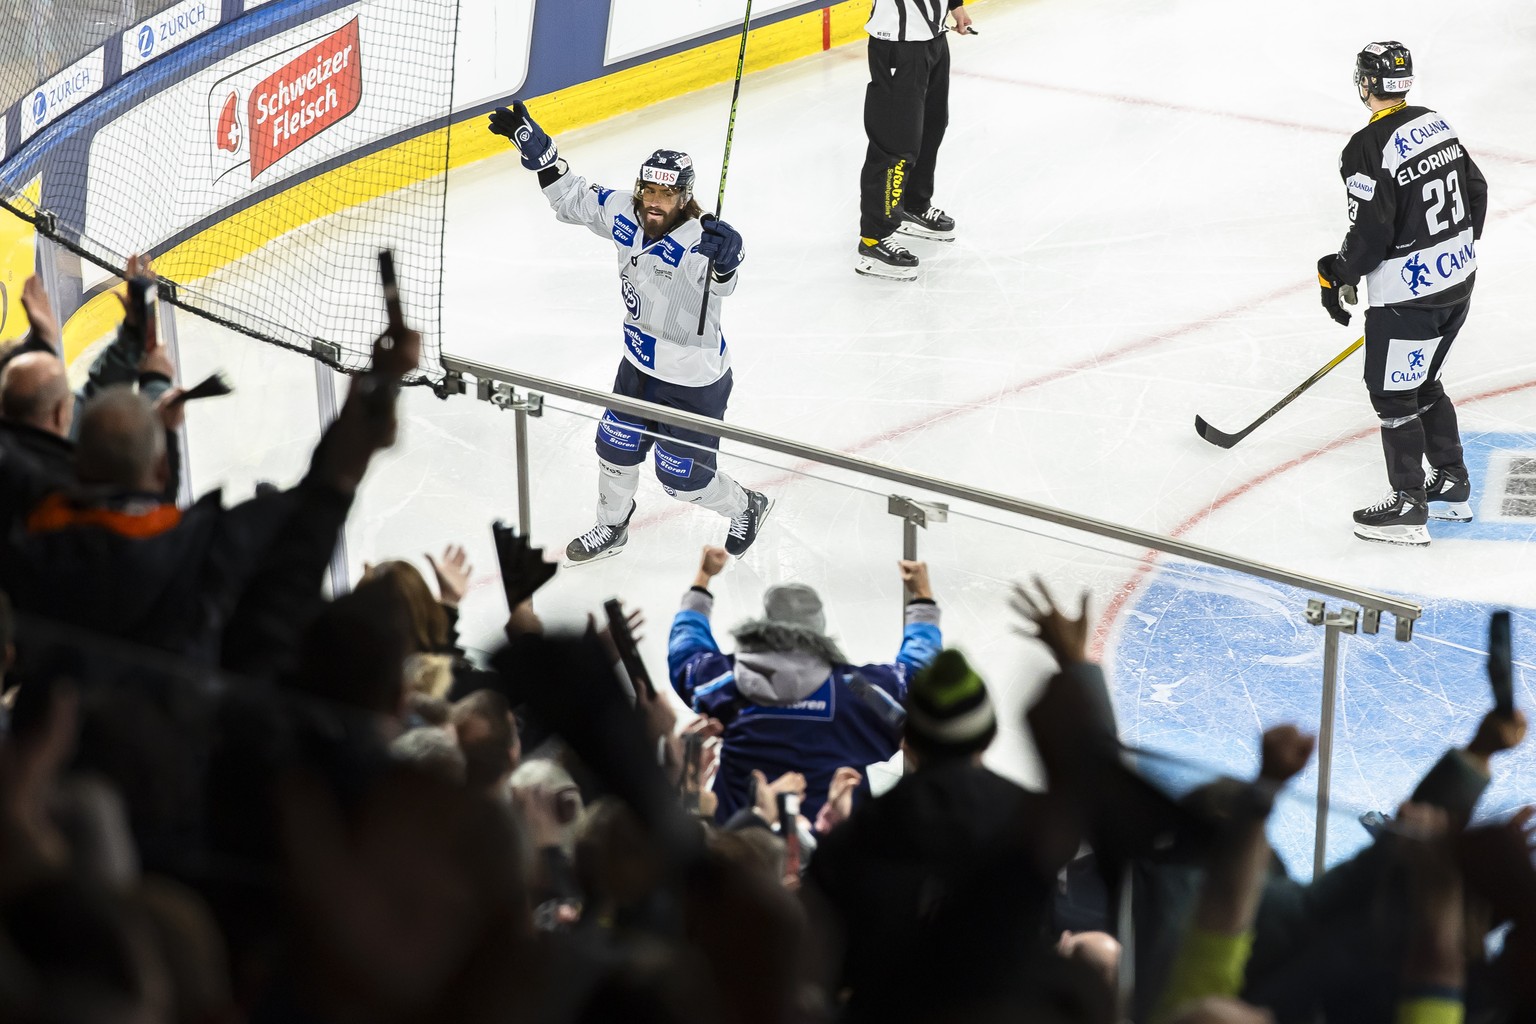 Ambri Piotta&#039;s Peter Mueller, center, celebrates after scoring the 4:2 during the game between Finnland&#039;s KalPa Kuopio and Switzerland&#039;s HC Ambri - Piotta, at the 95th Spengler Cup ice  ...